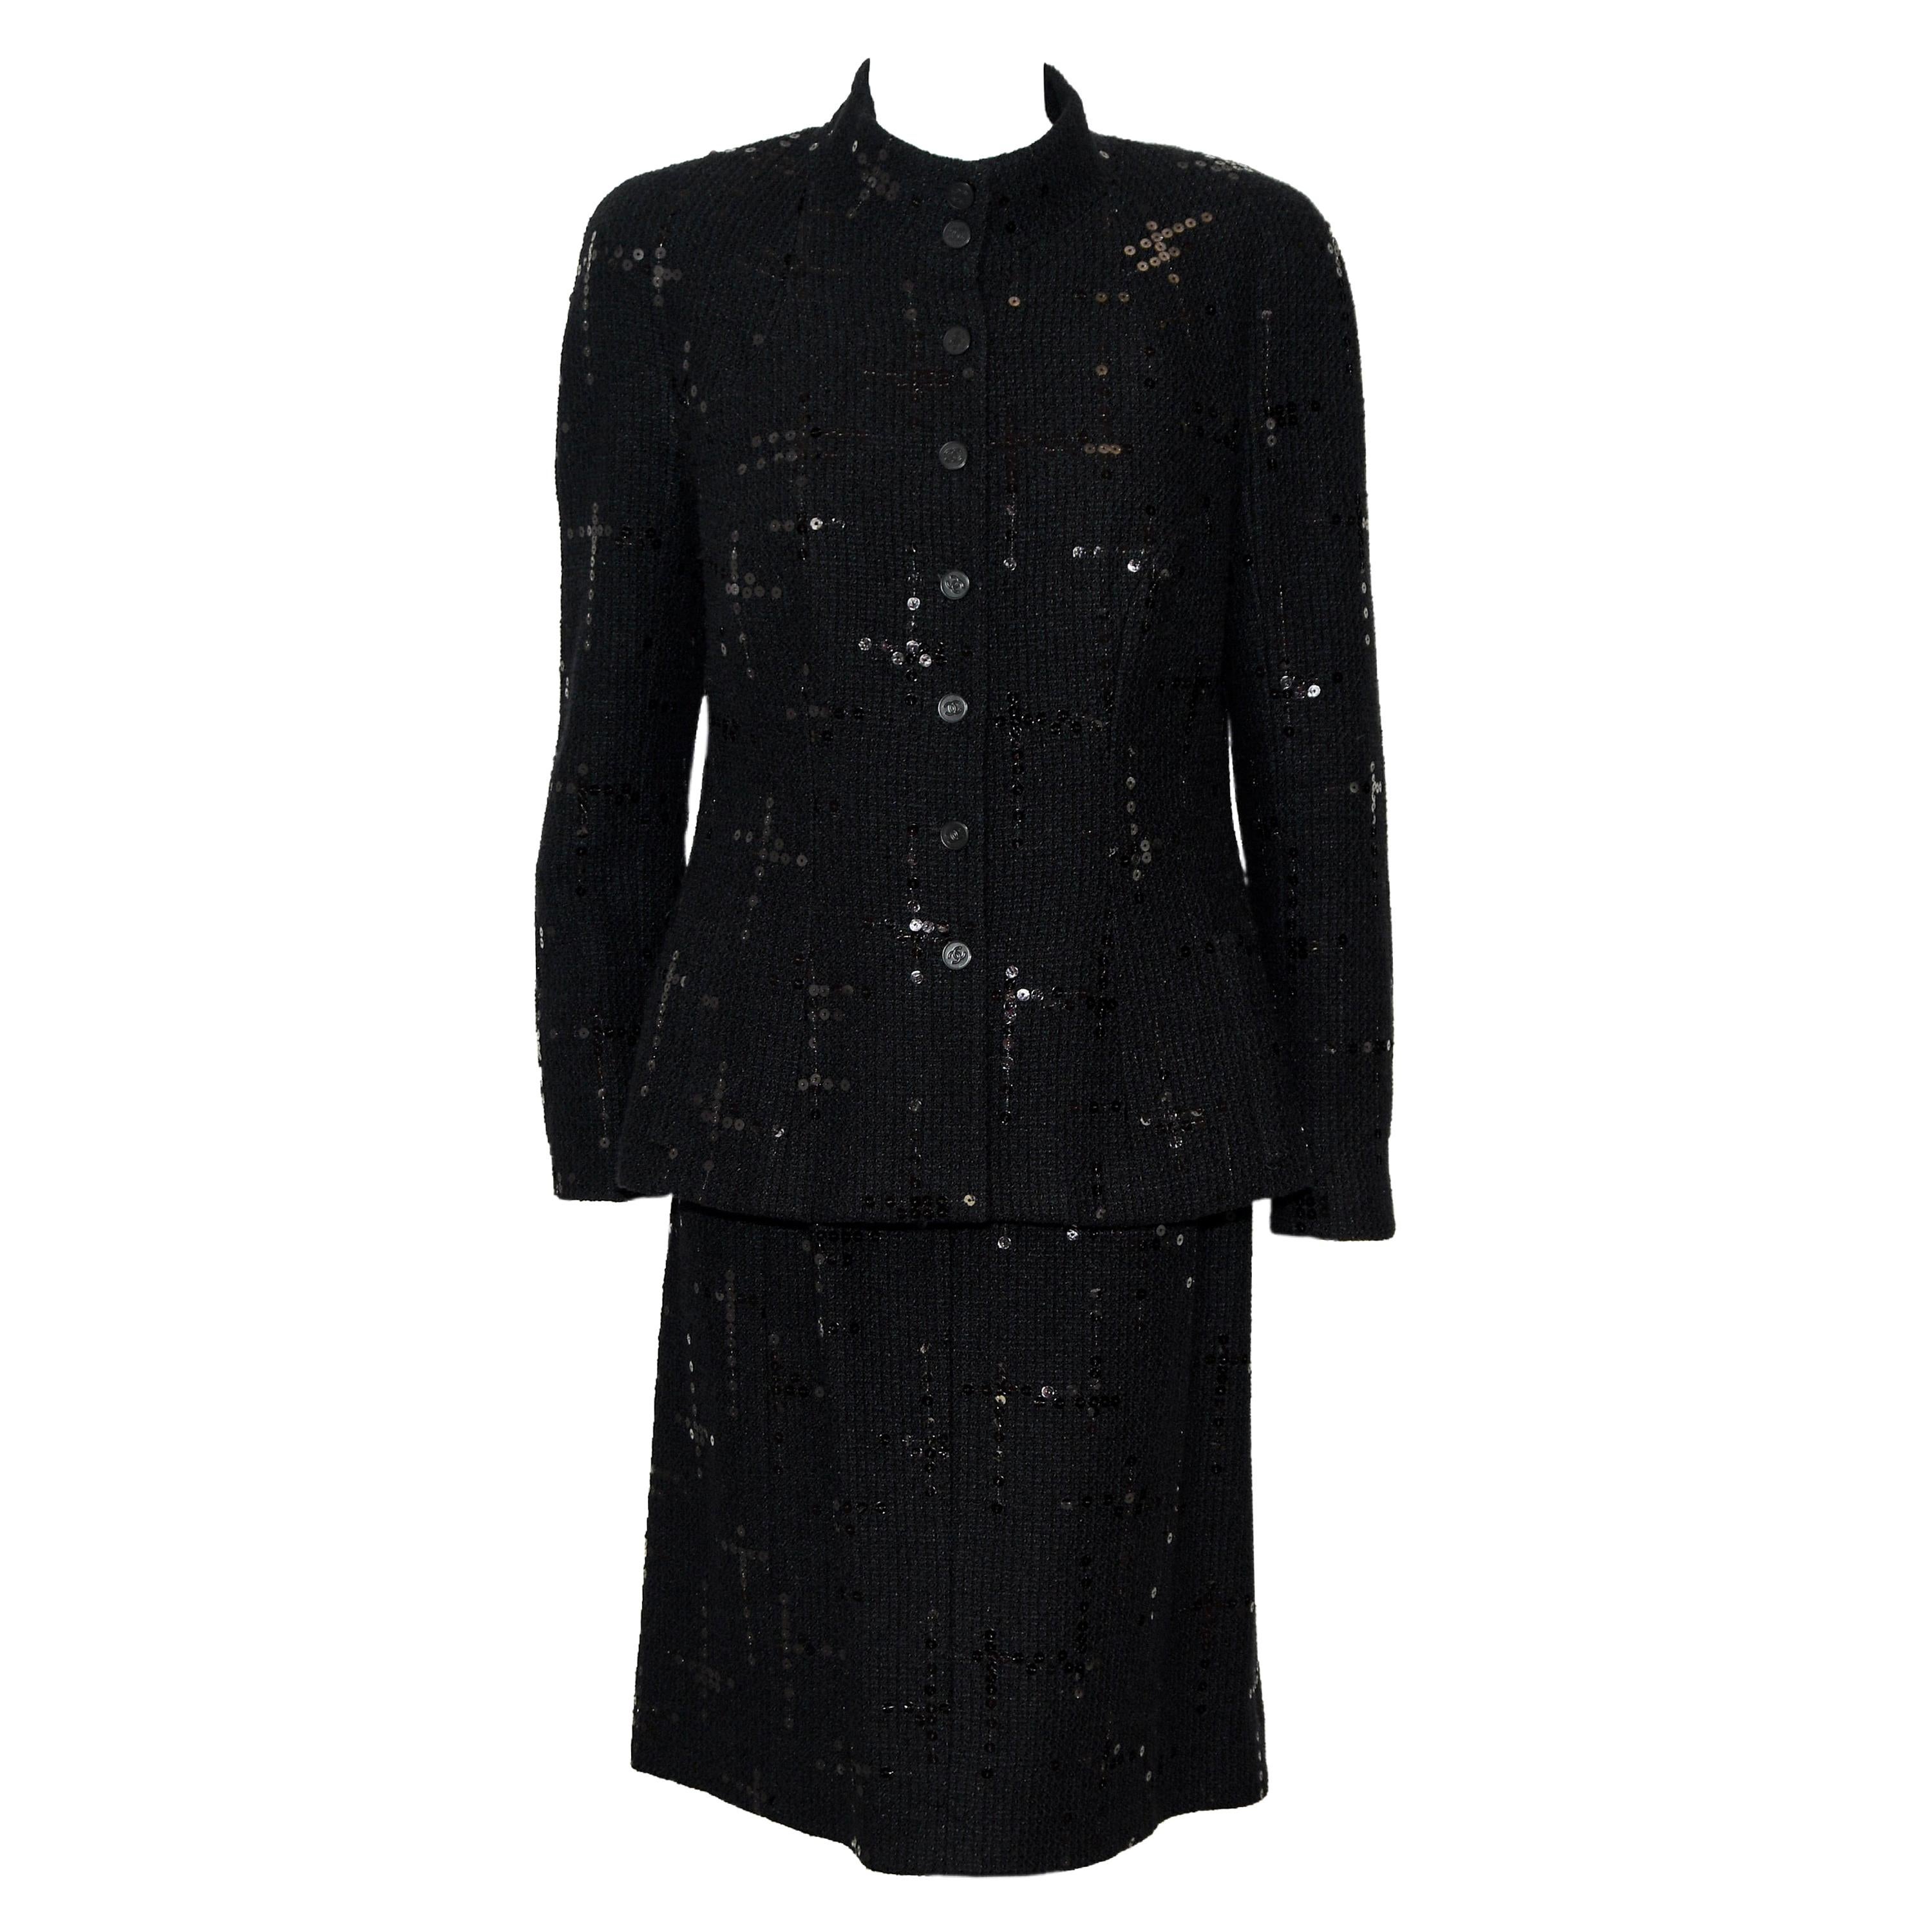 Chanel  Black Sequined Tweed Skirt Suit From 2002 Fall Collection For Sale